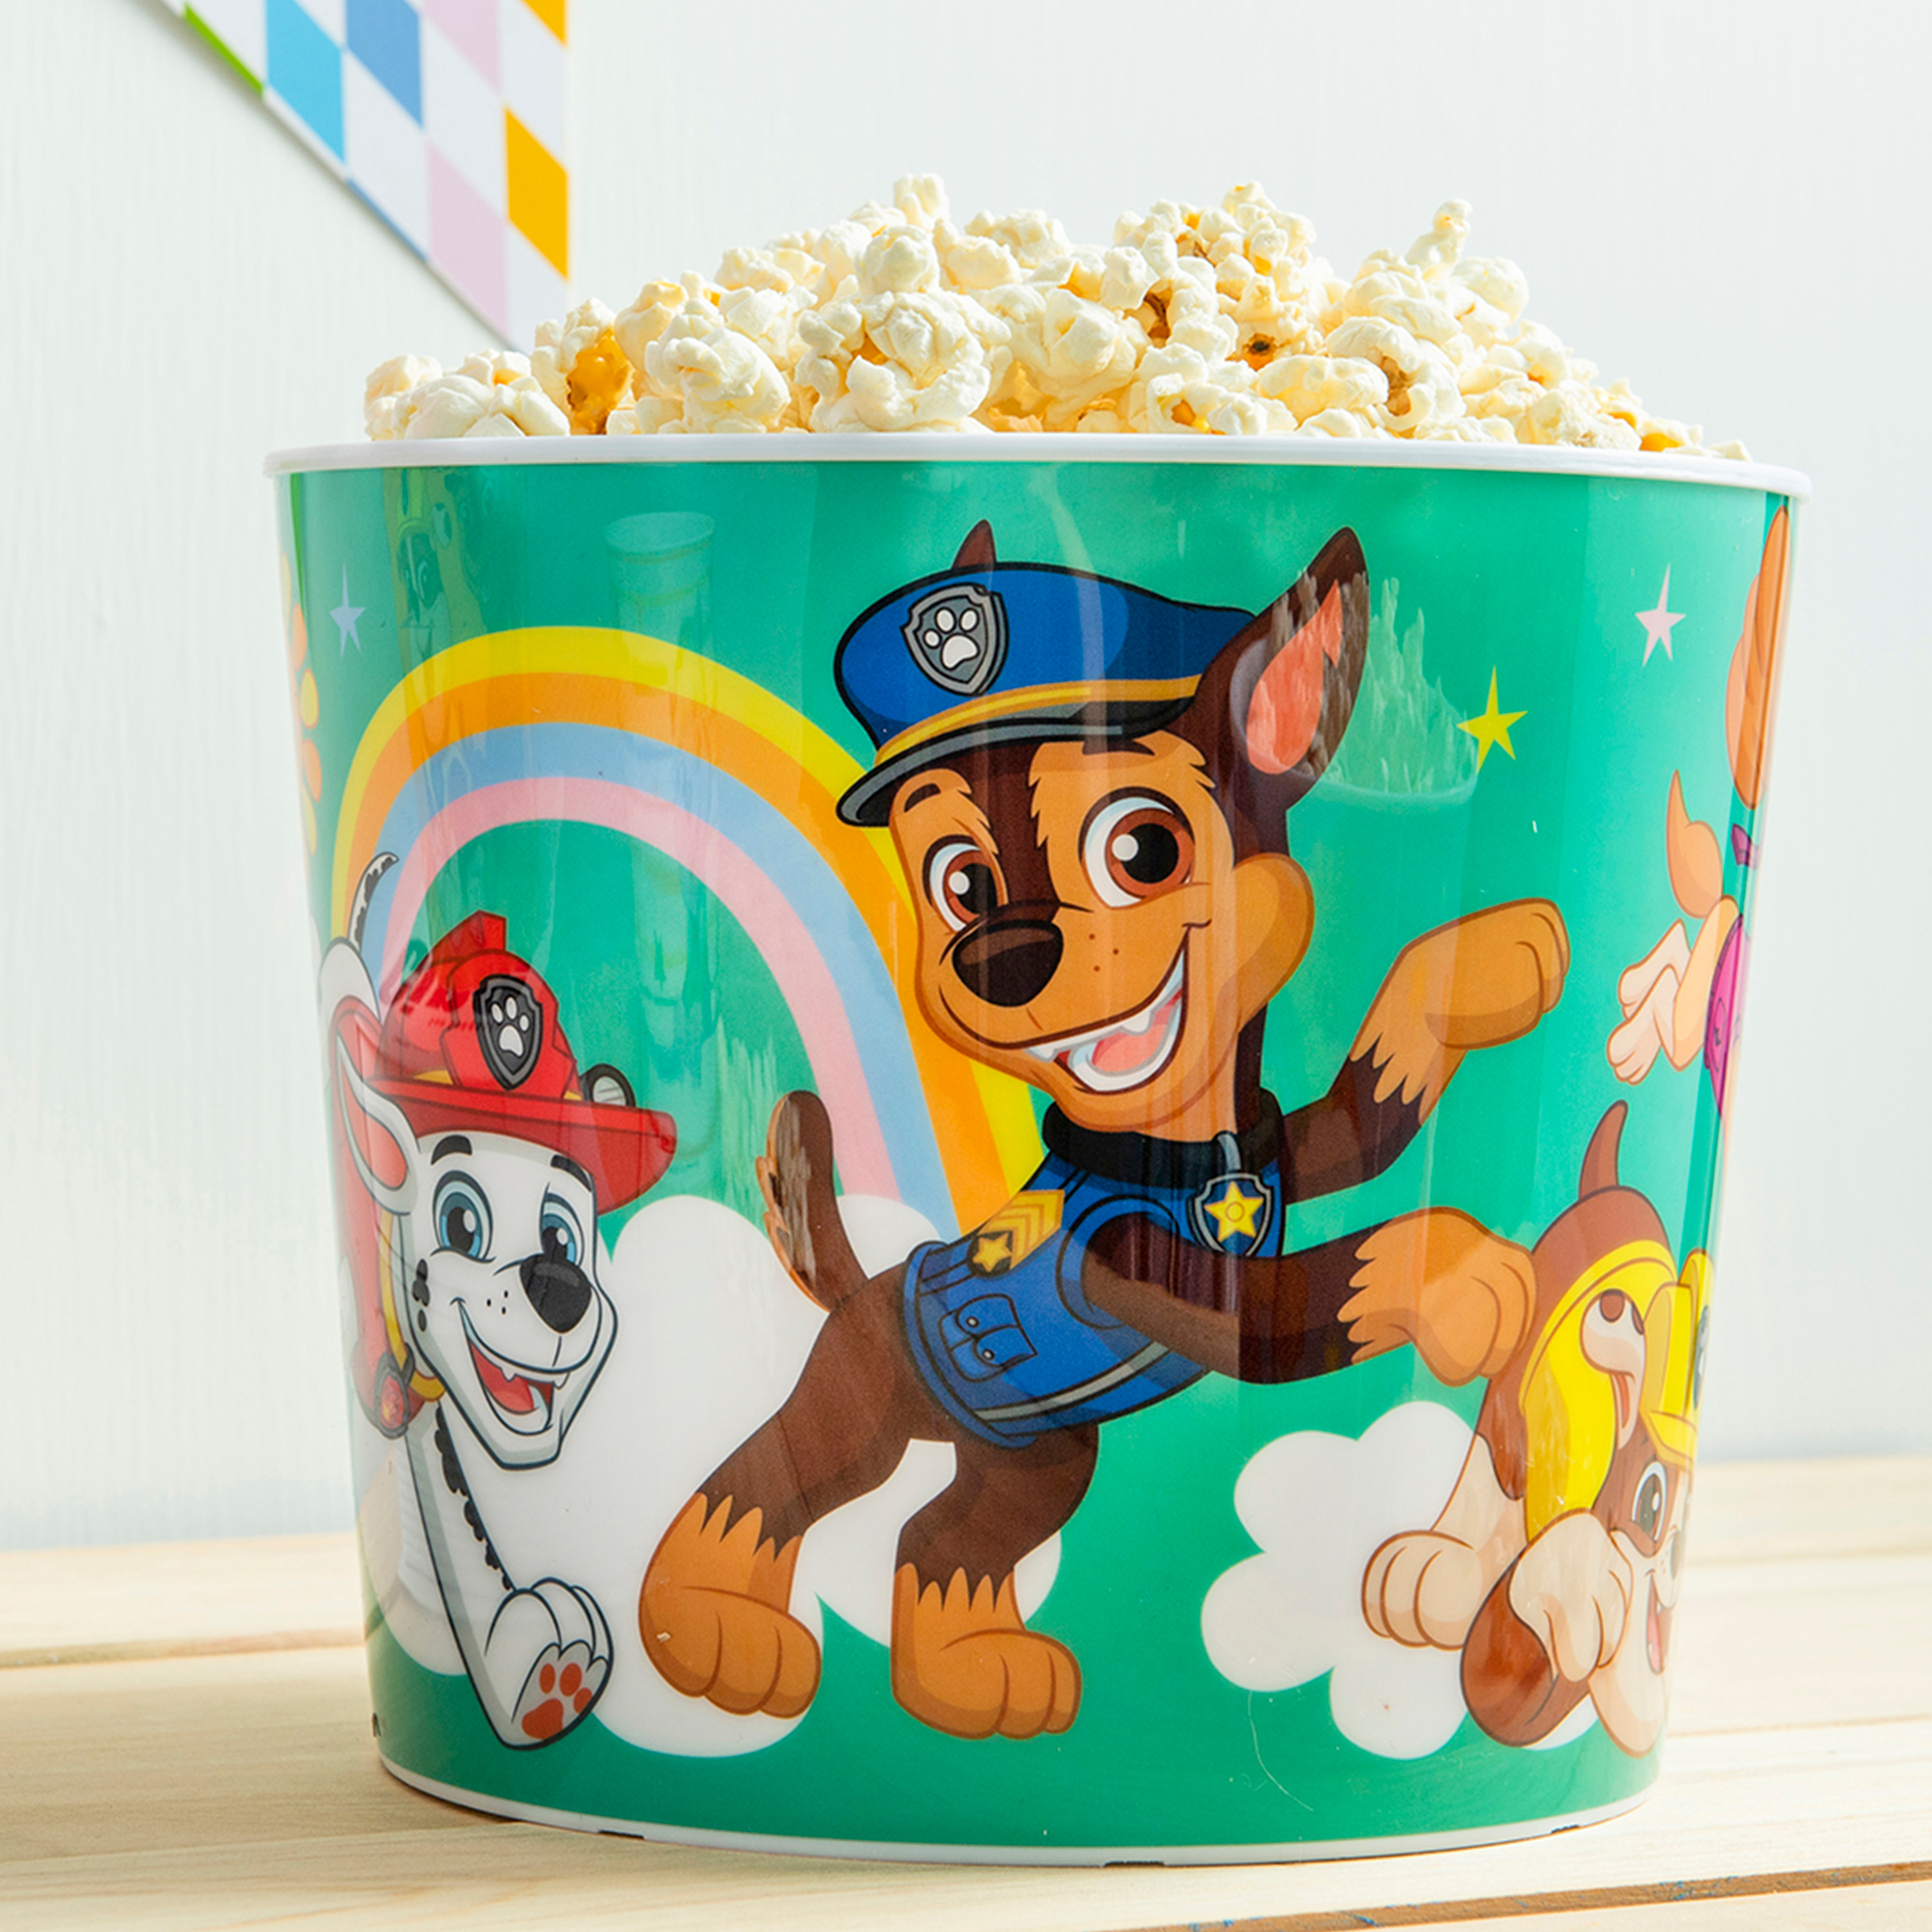 Paw Patrol Plastic Popcorn Container and Bowls, Chase, Marshall and Friends, 5-piece set slideshow image 6